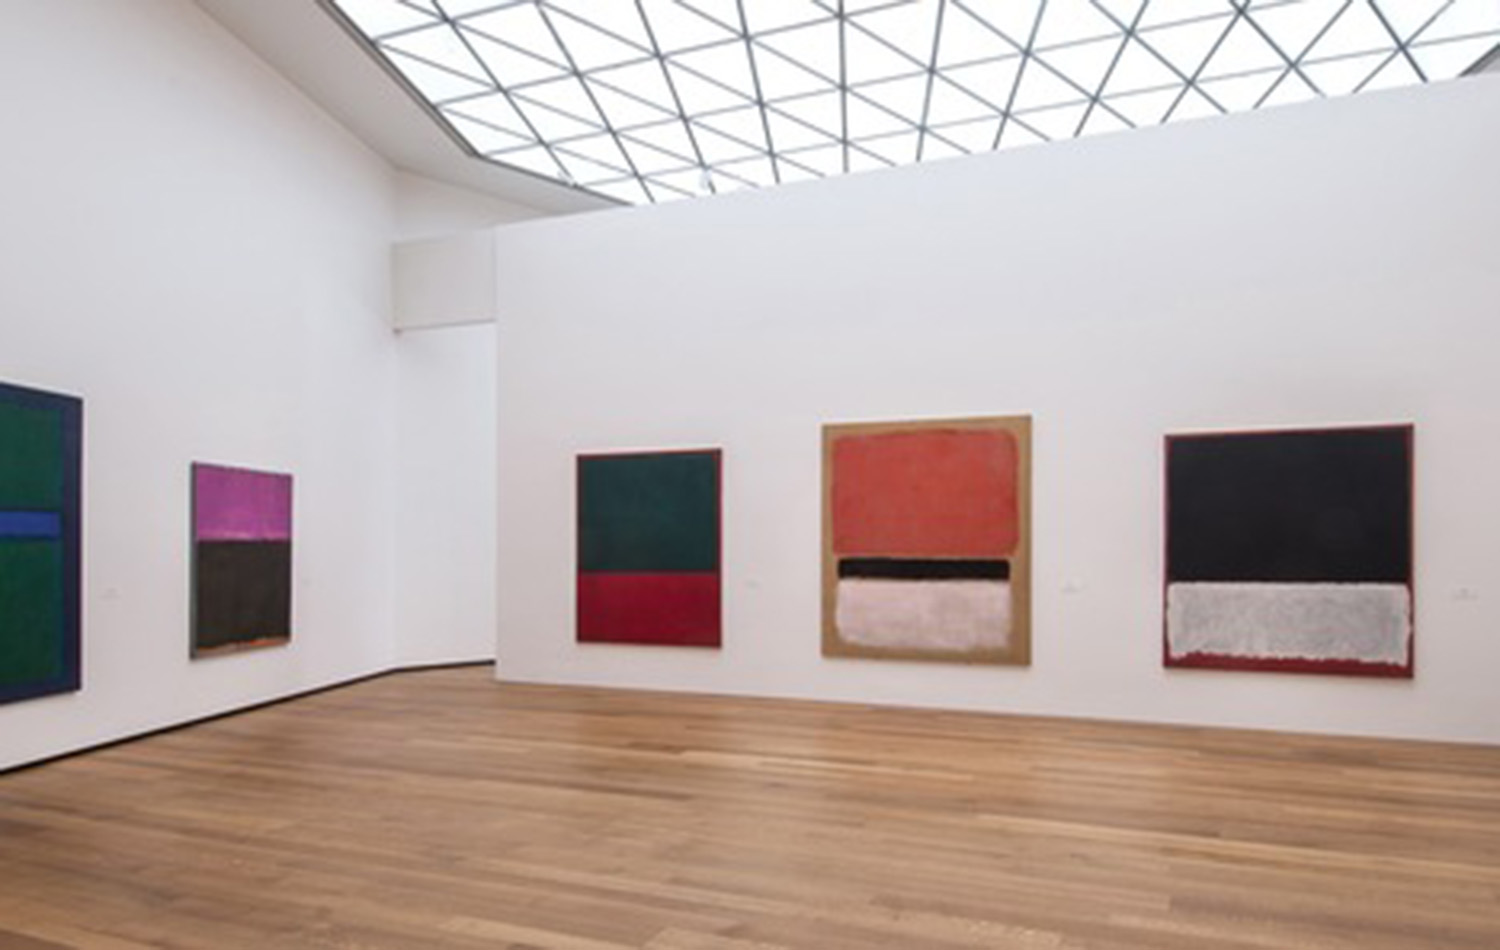  Works by Rothko in the new Tower Gallery (Image: courtesy of the National Gallery of Art, Washington, DC) 